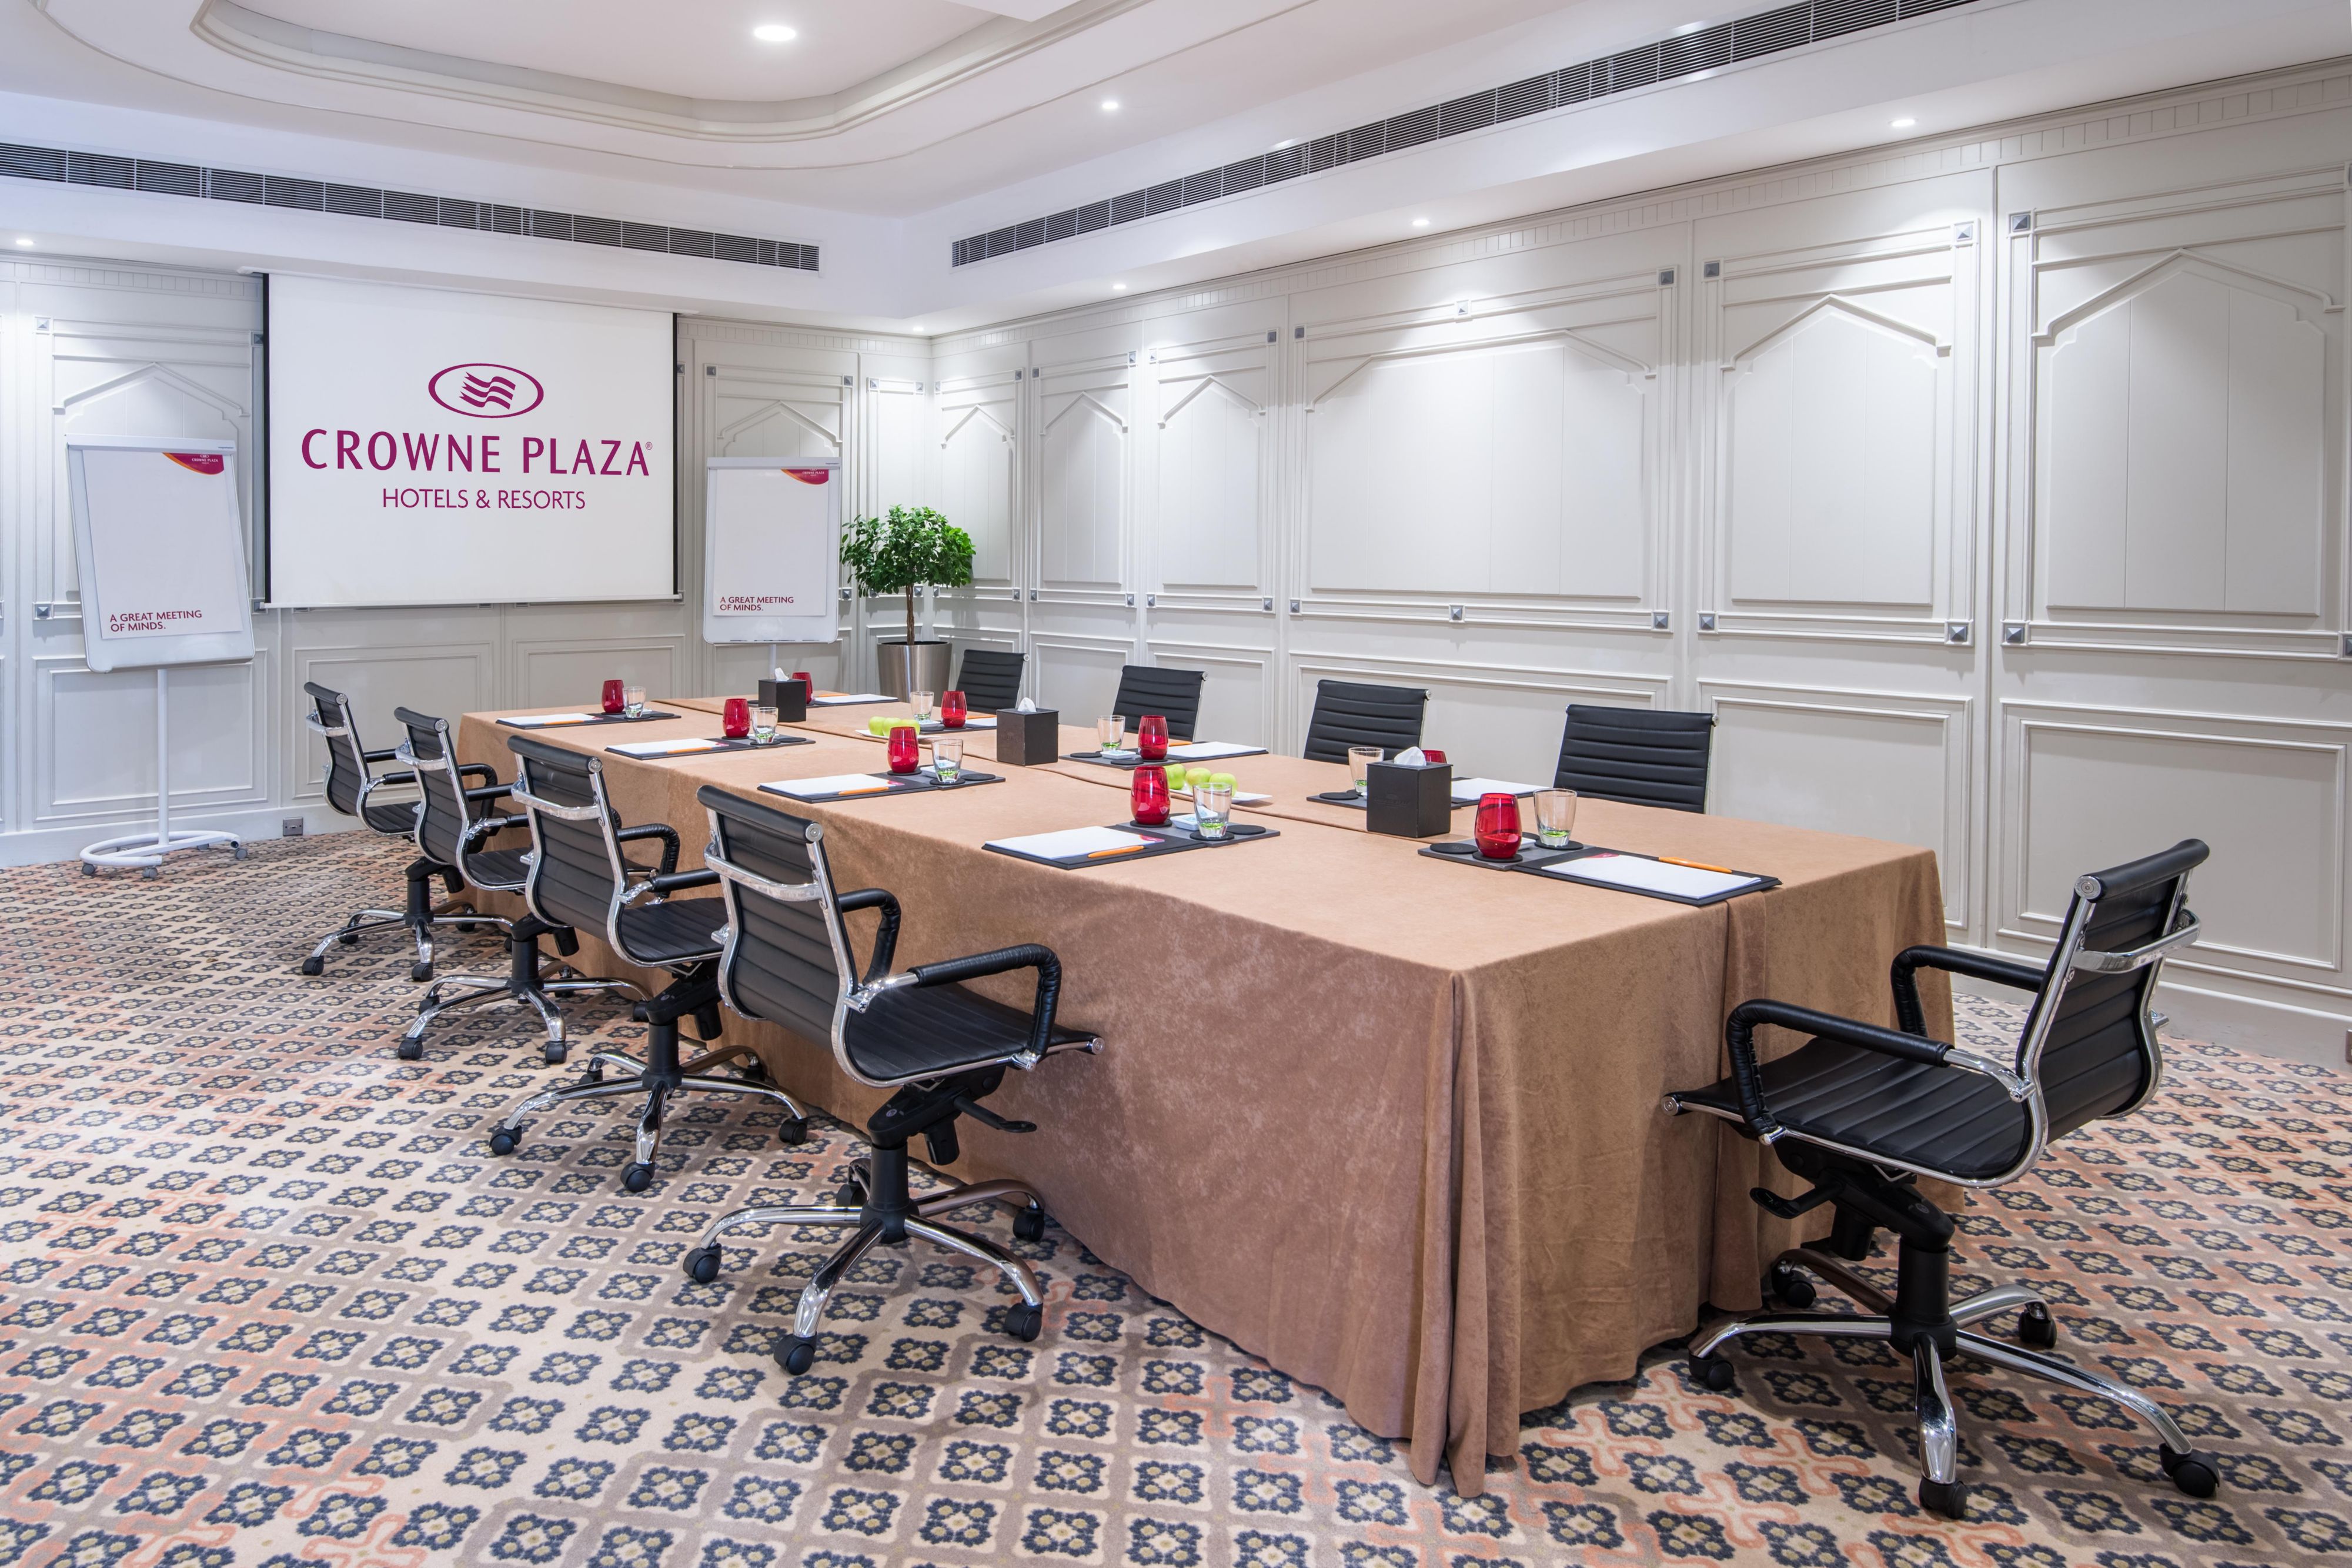 Al Khanjar is the perfect venue for small meetings